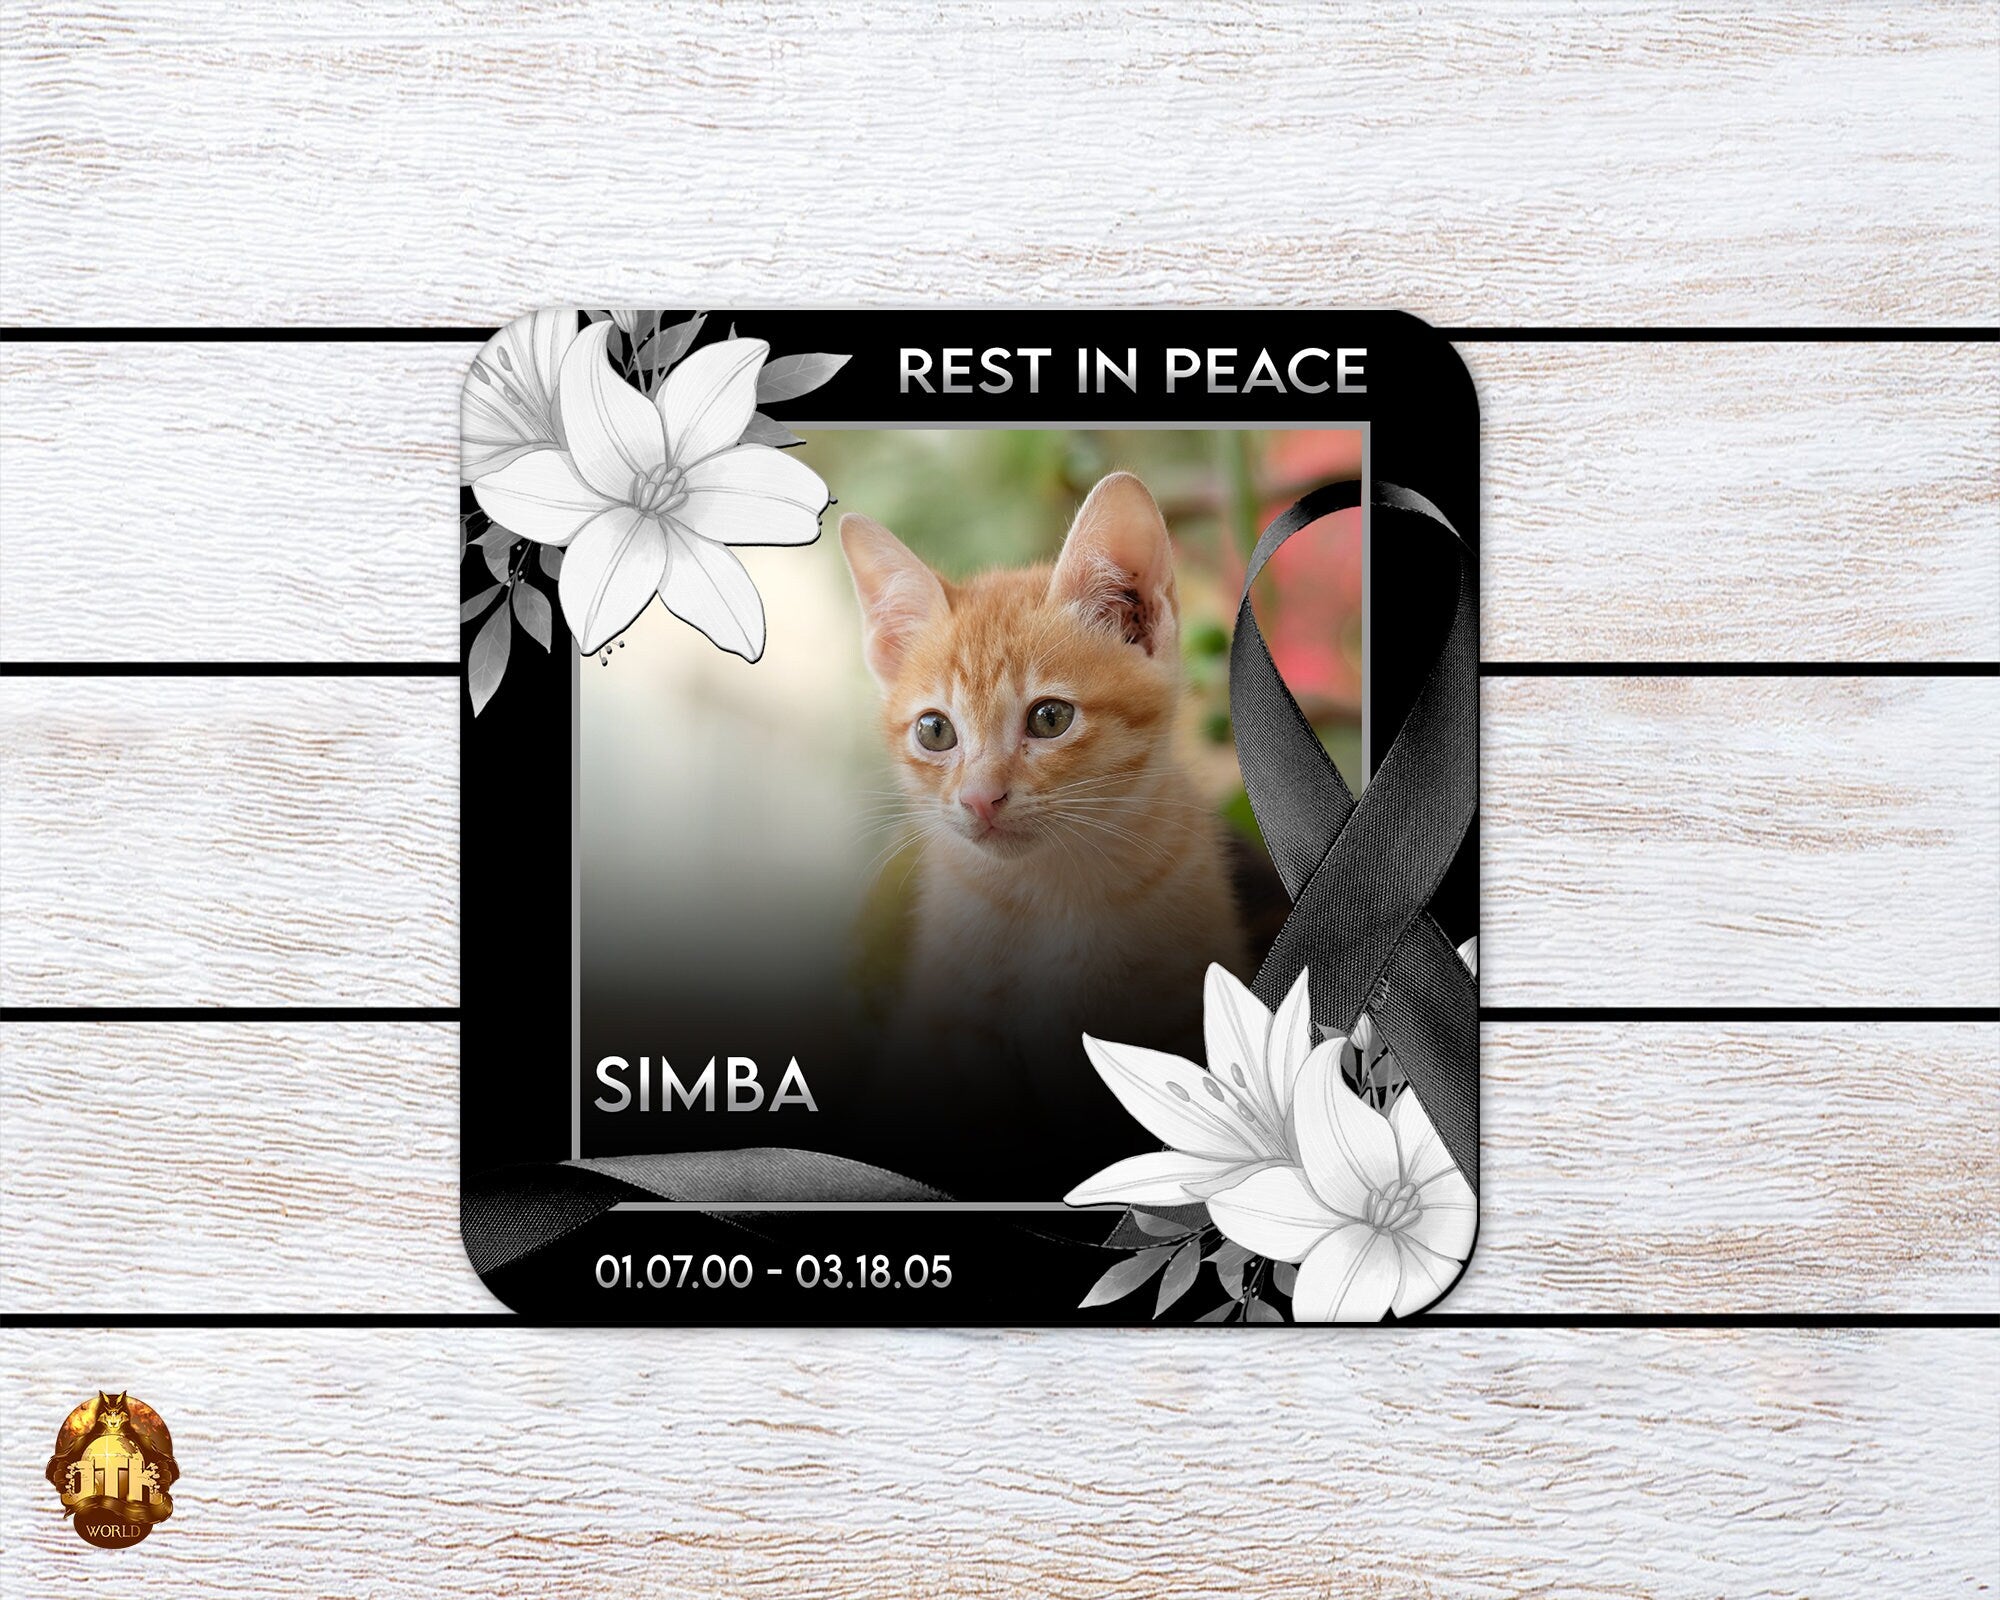 Personalized Memorial Photo Coasters - Custom Rest In Peace Coasters - Remembrance Photo Coasters - Add Your Own Photo, Name & Date